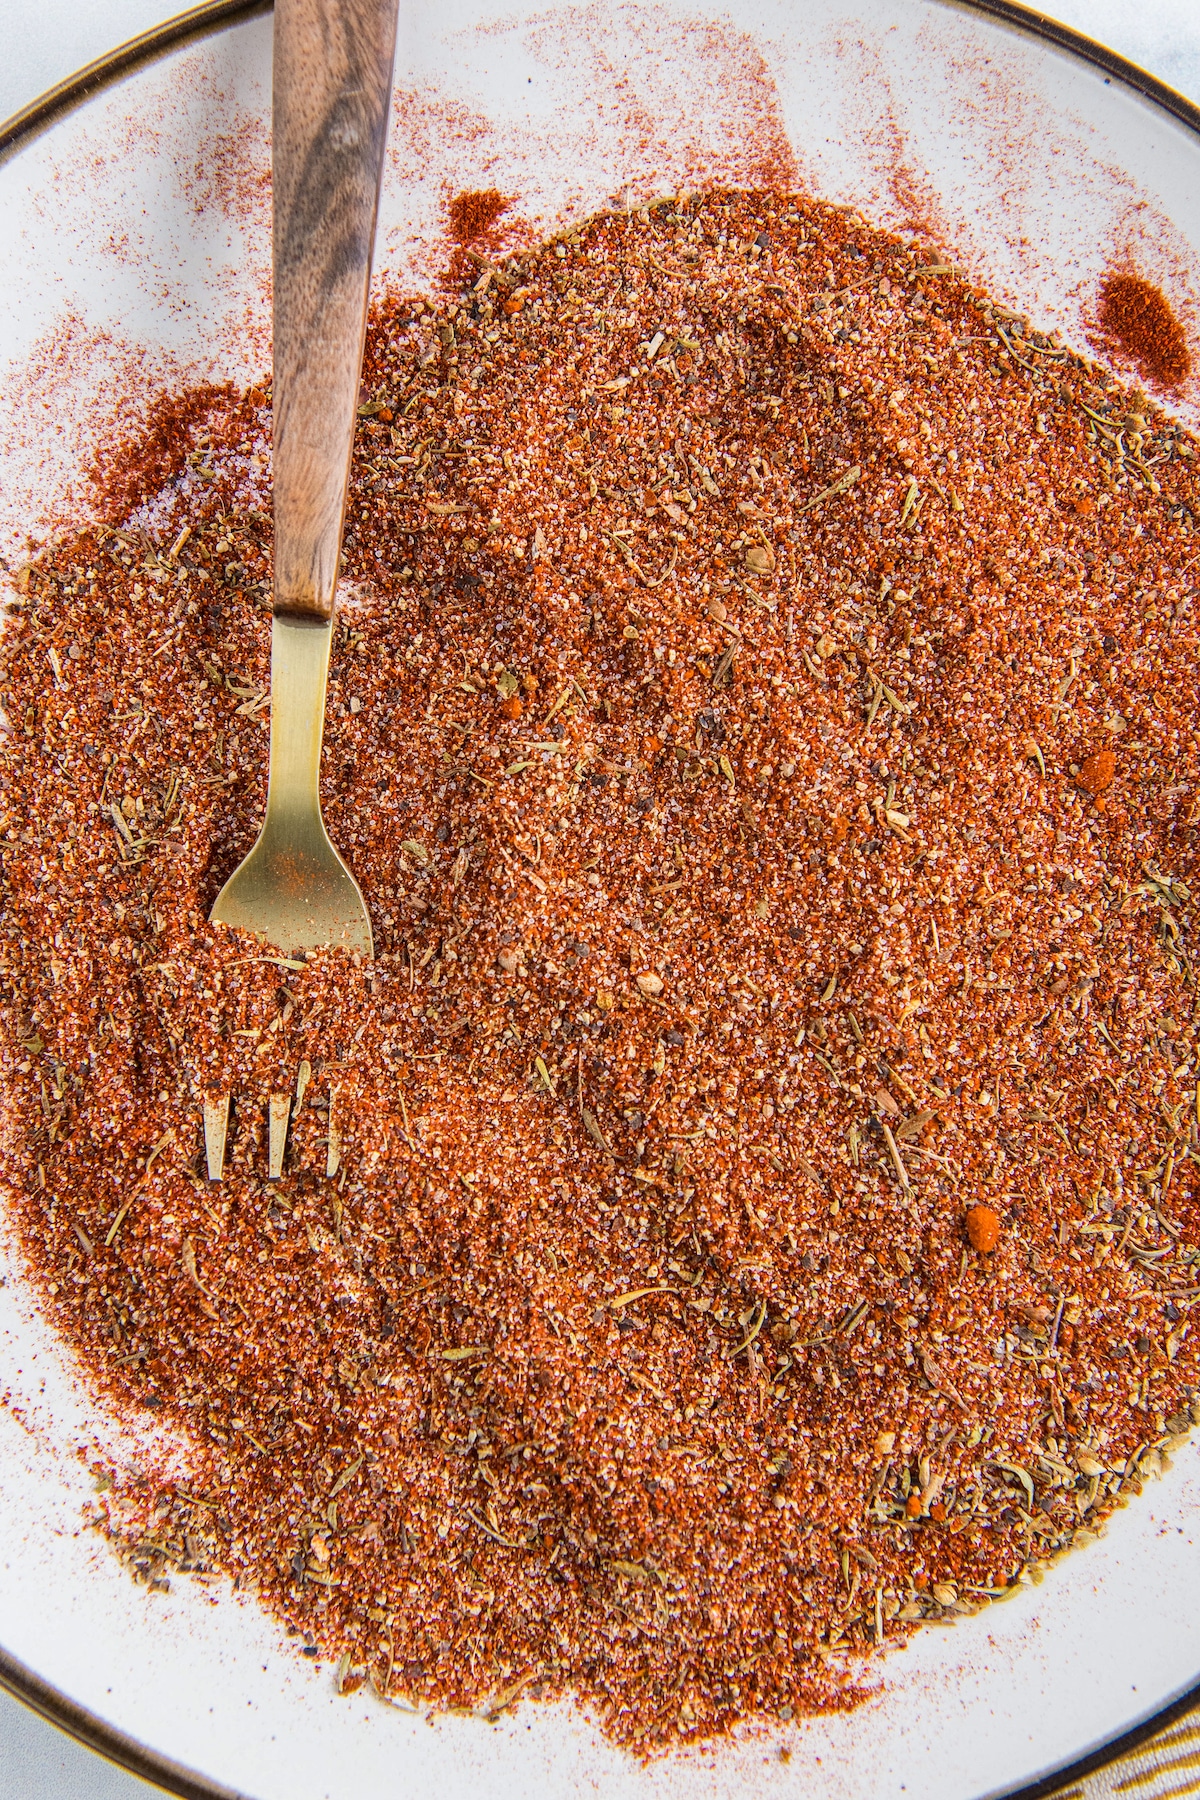 Homemade cajun seasoning spread out on a white plate with a fork after mixing.